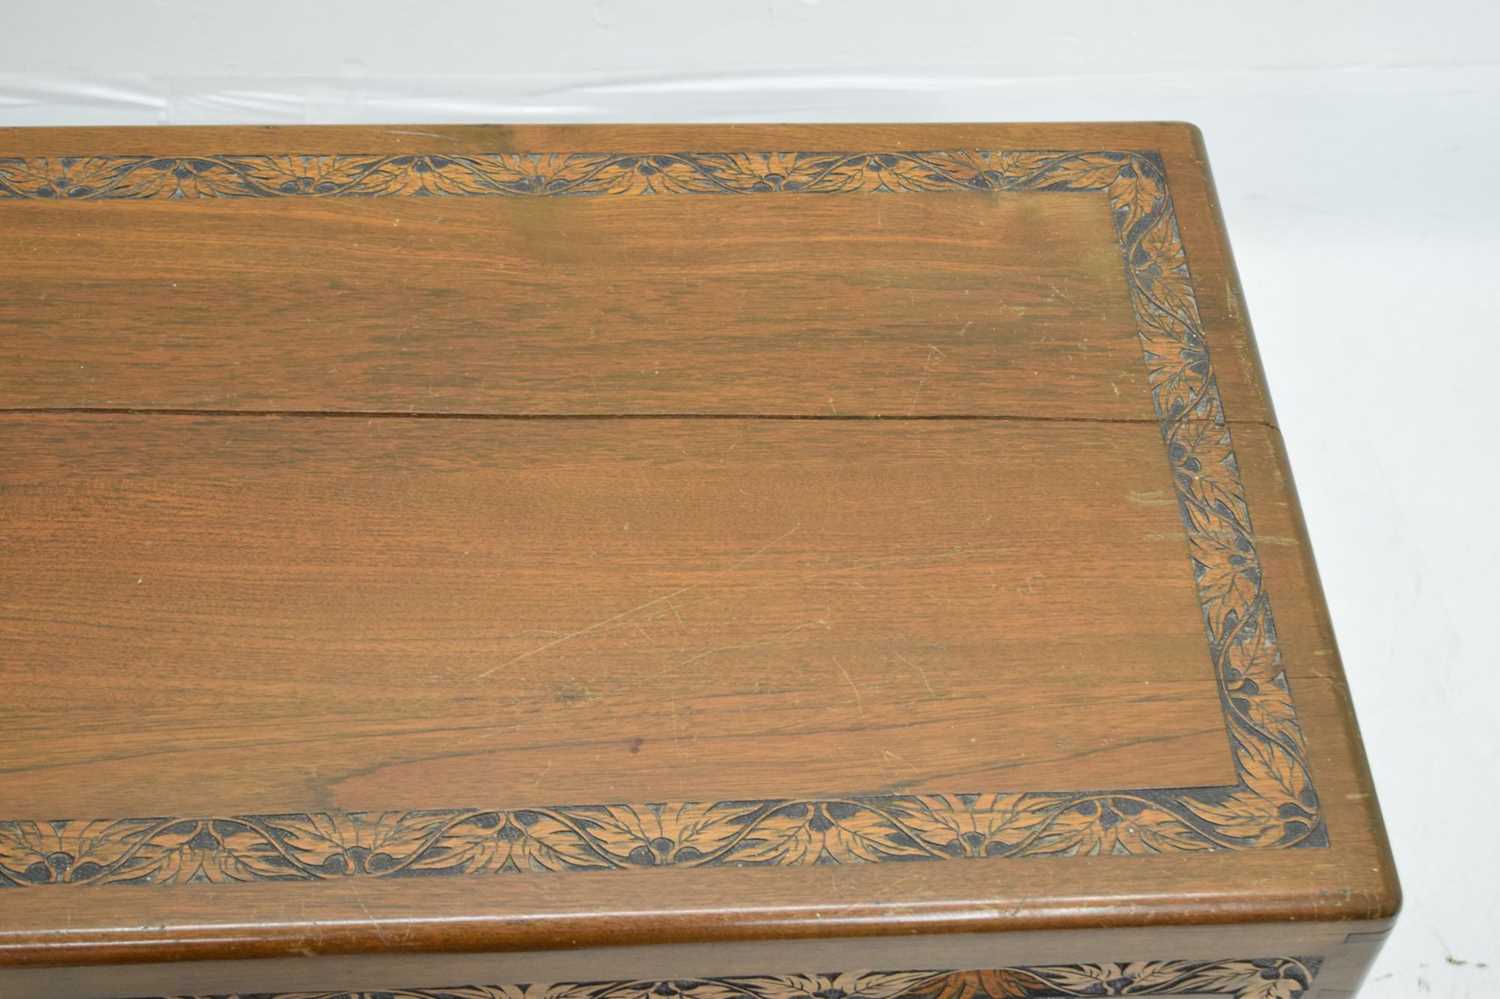 20th century Chinese camphor wood trunk - Image 5 of 10